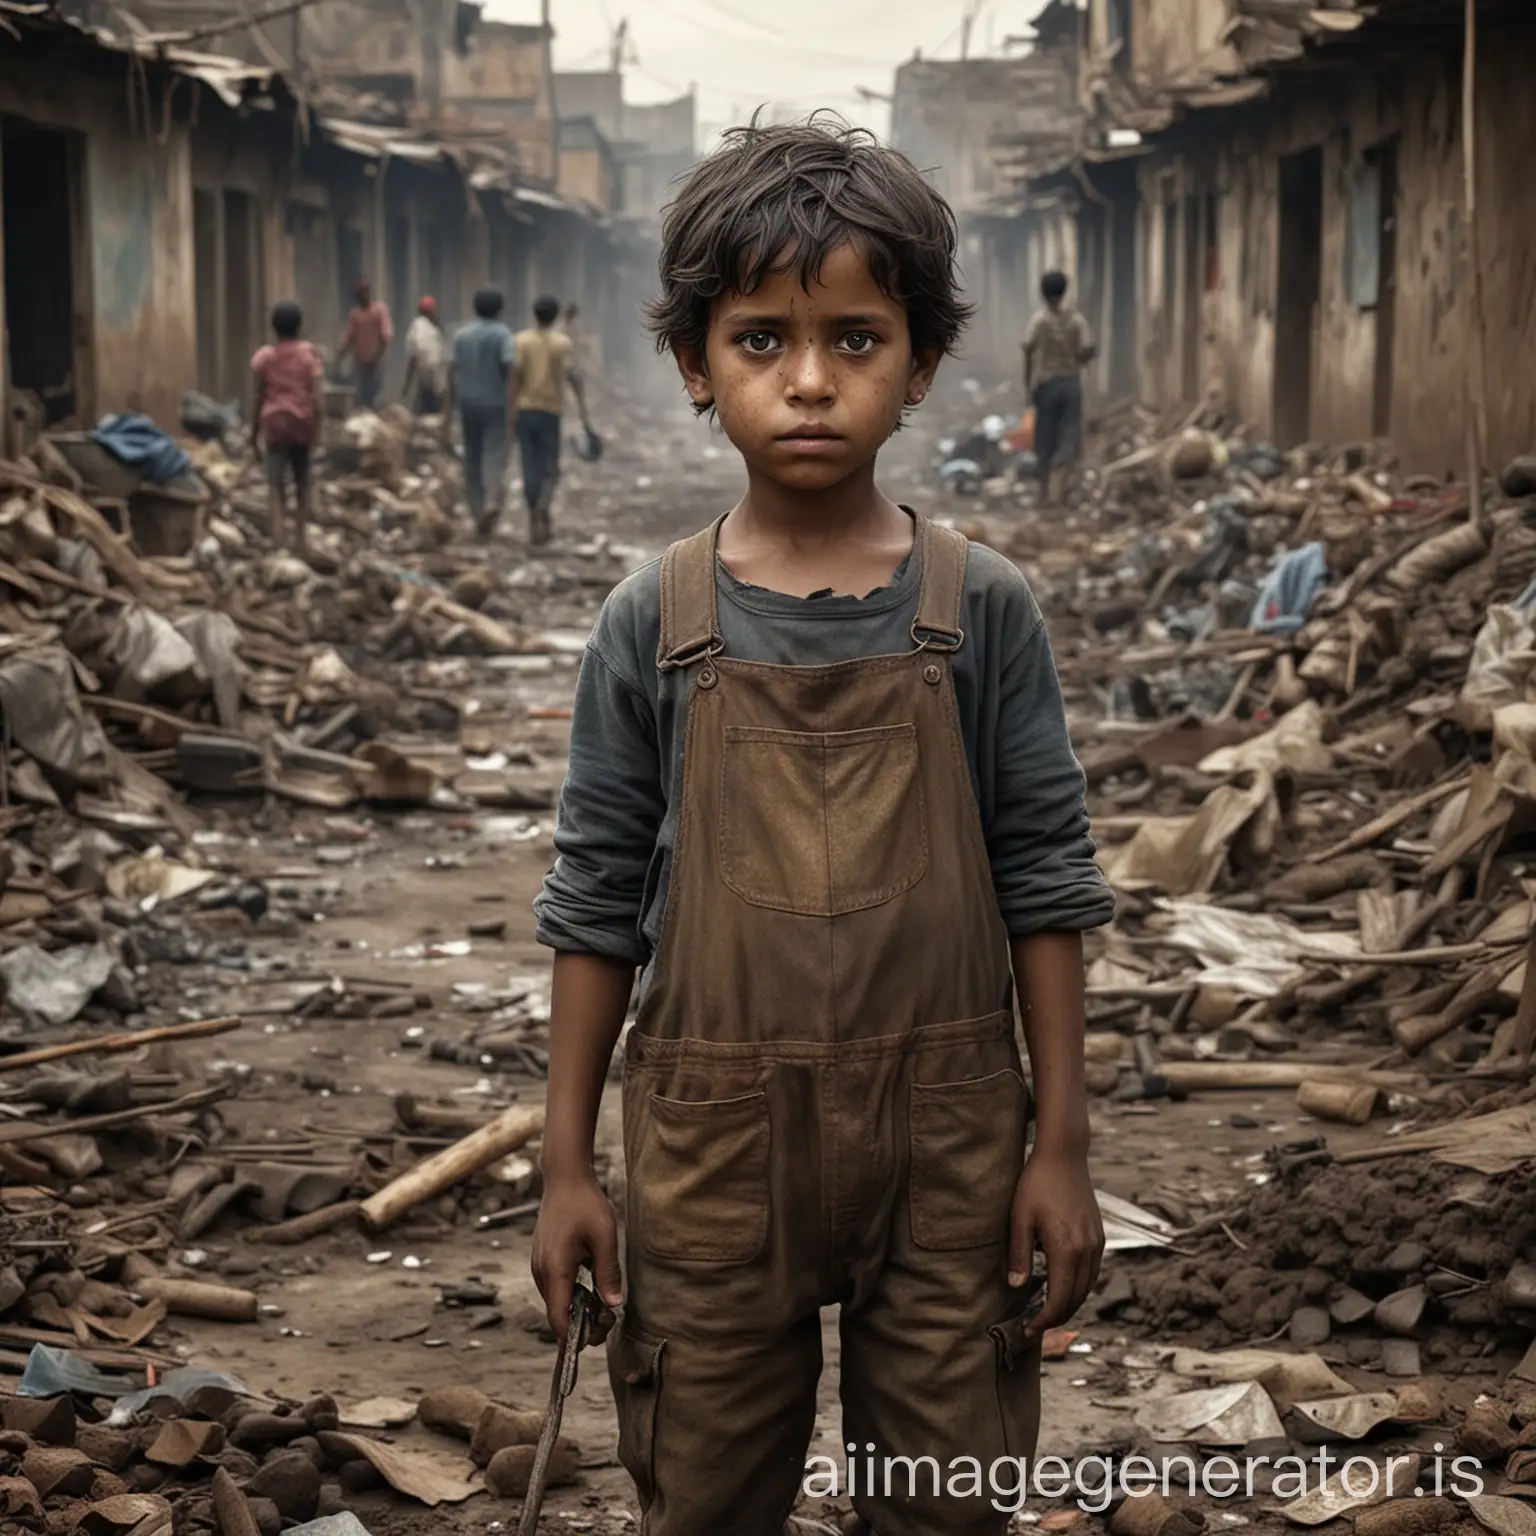 generate a hyper realistic image of The Scourge of Child Labor: The Threat to Innocent Lives